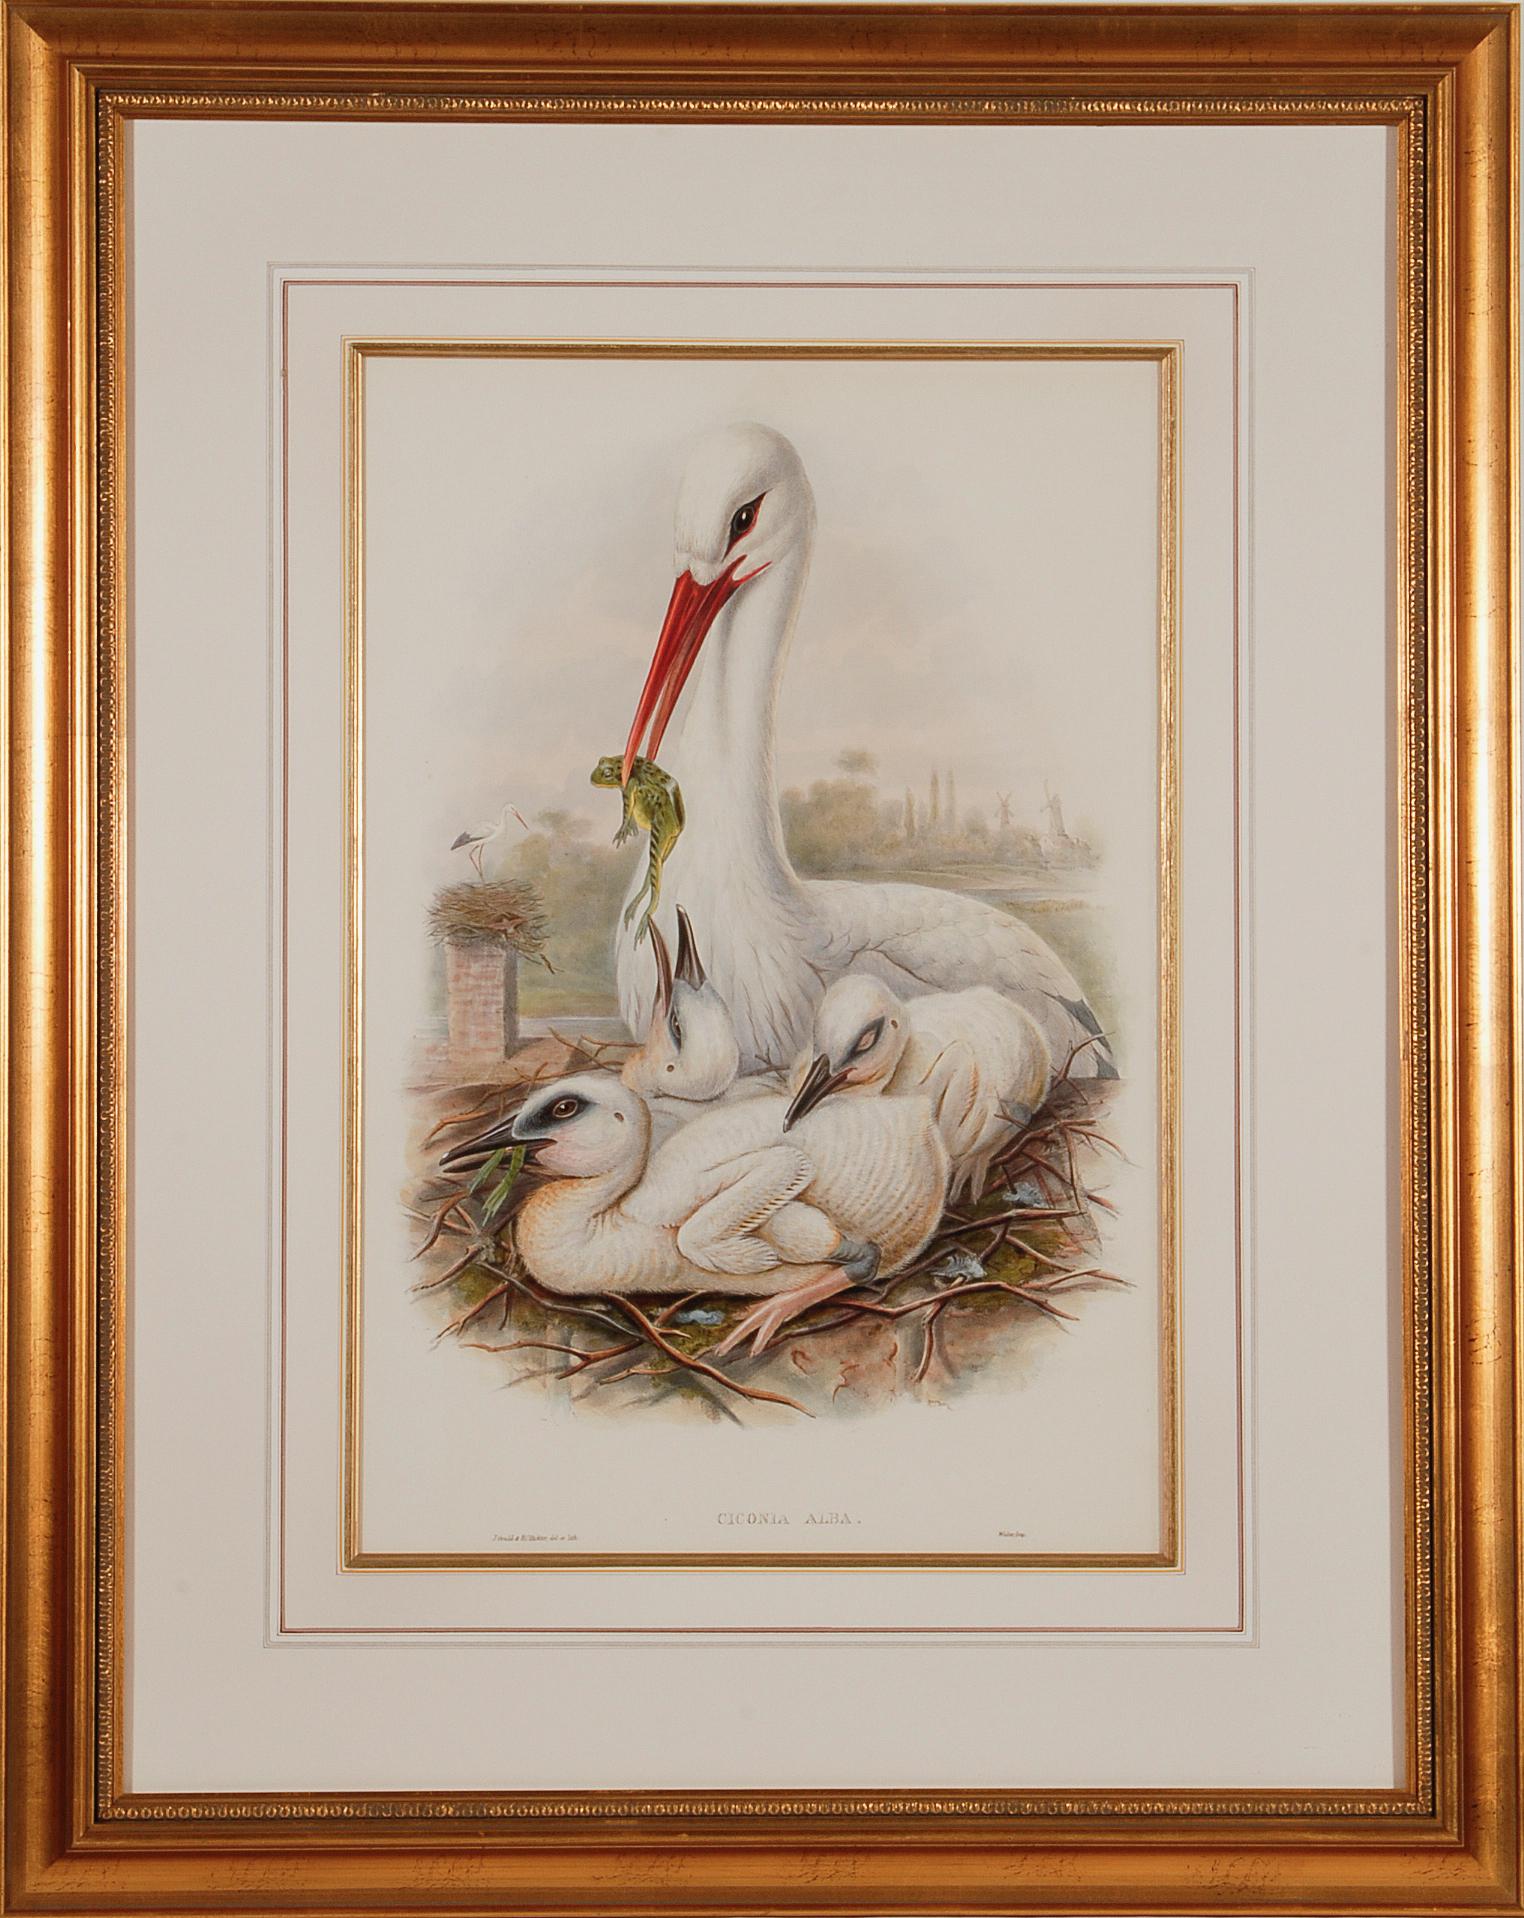 John Gould and Henry Constantine Richter Animal Print - Stork Family: A Framed Original 19th C. Hand-colored Lithograph by Gould